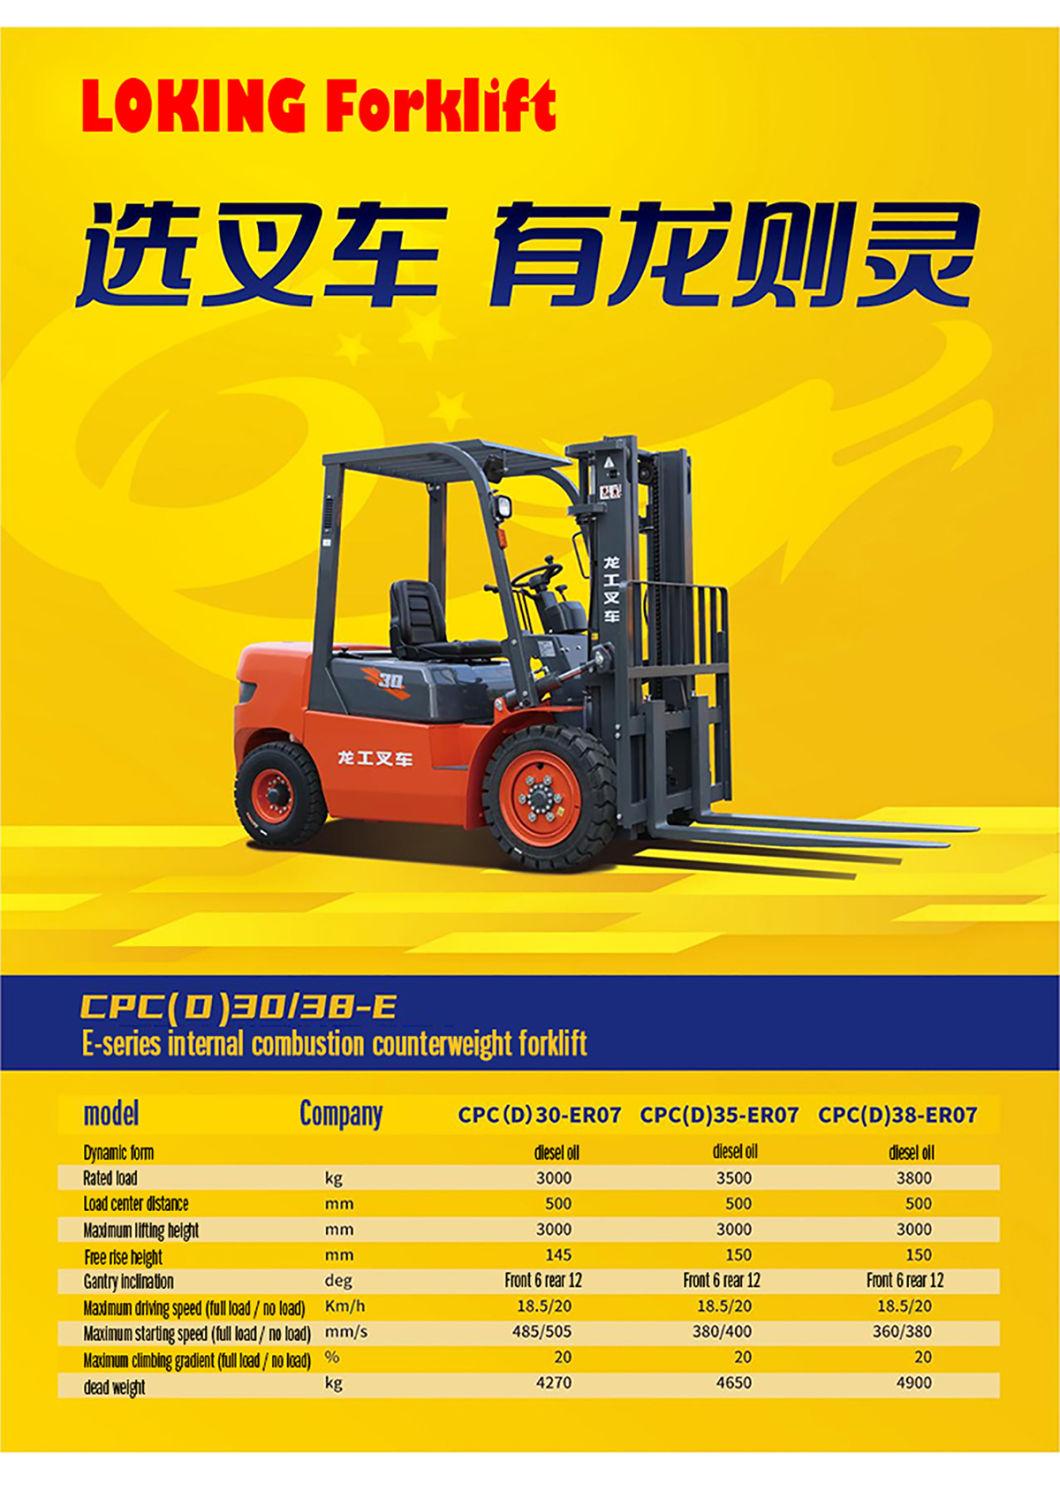 High Quality Truck Stacker Best Price Diesel Forklift for Factory Warehouse